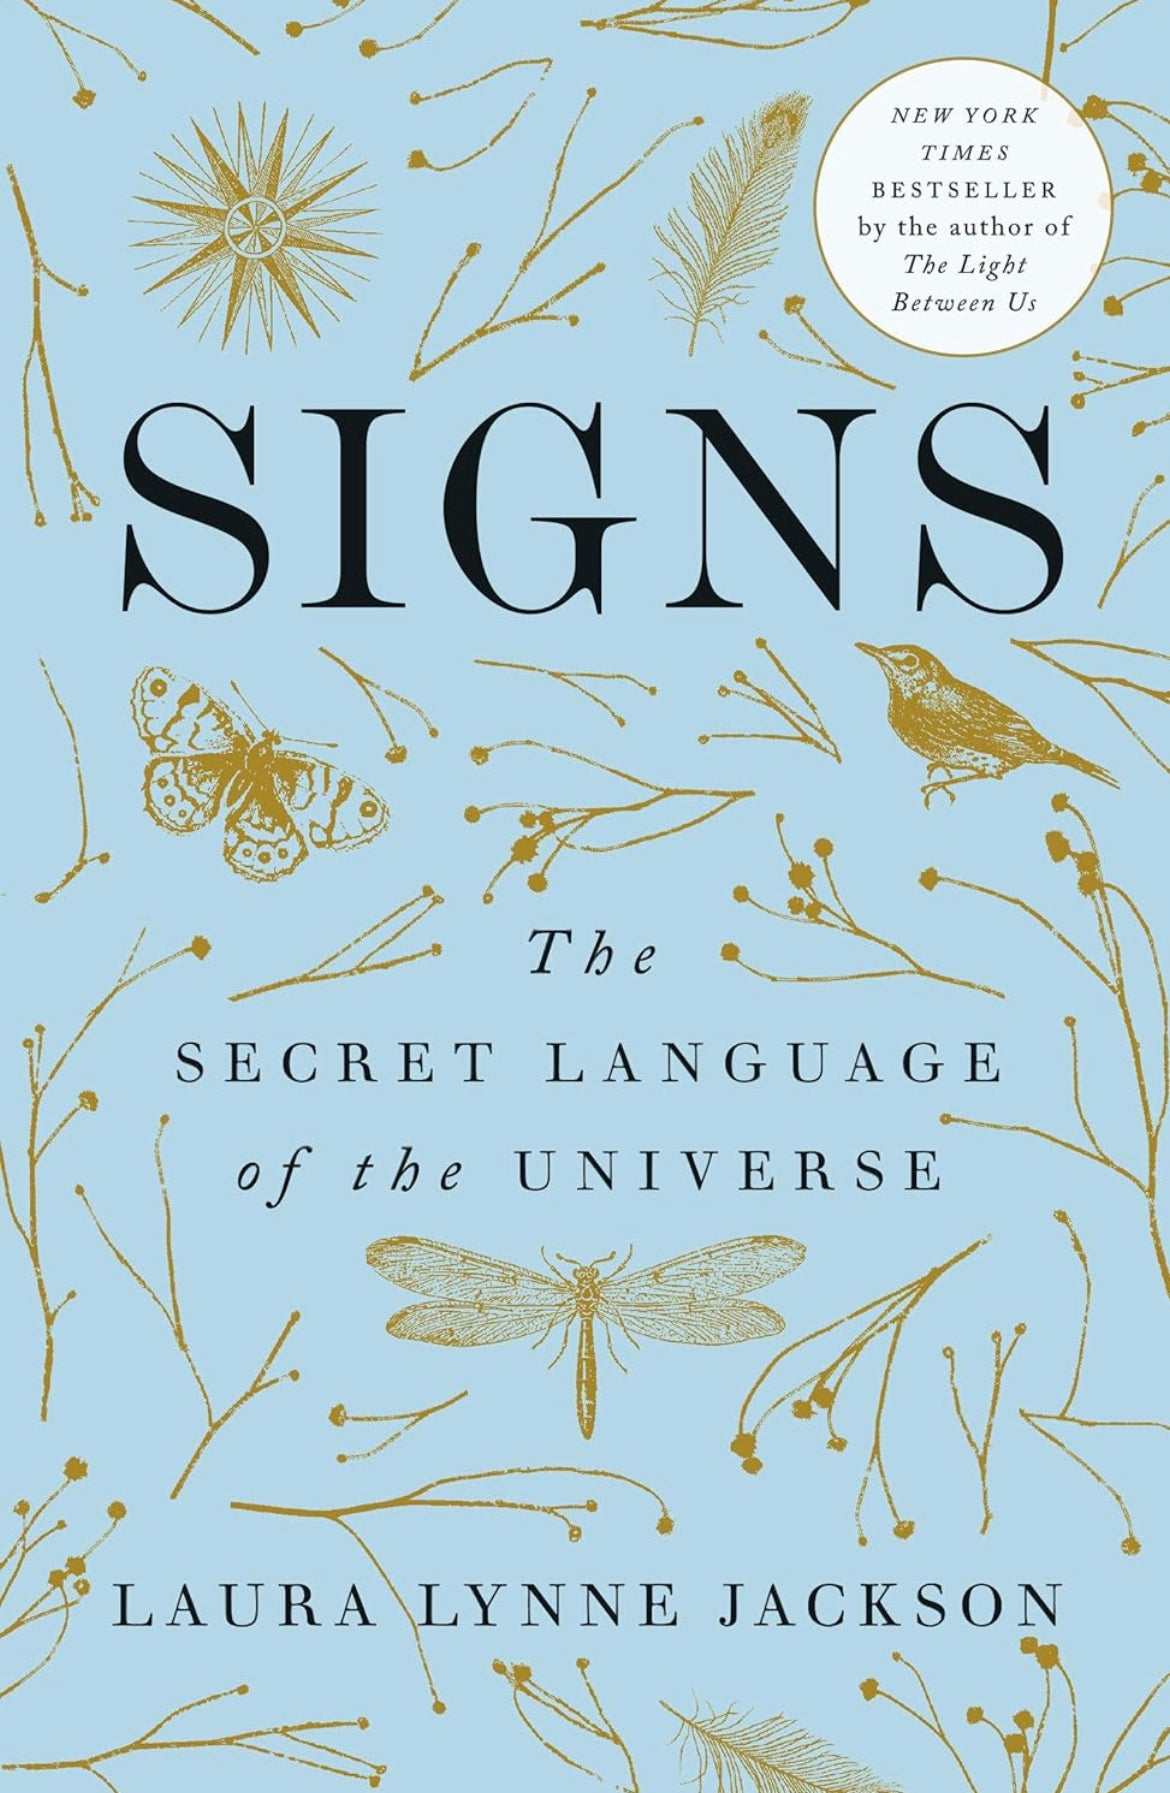 Signs by Laura Lynne Jackson